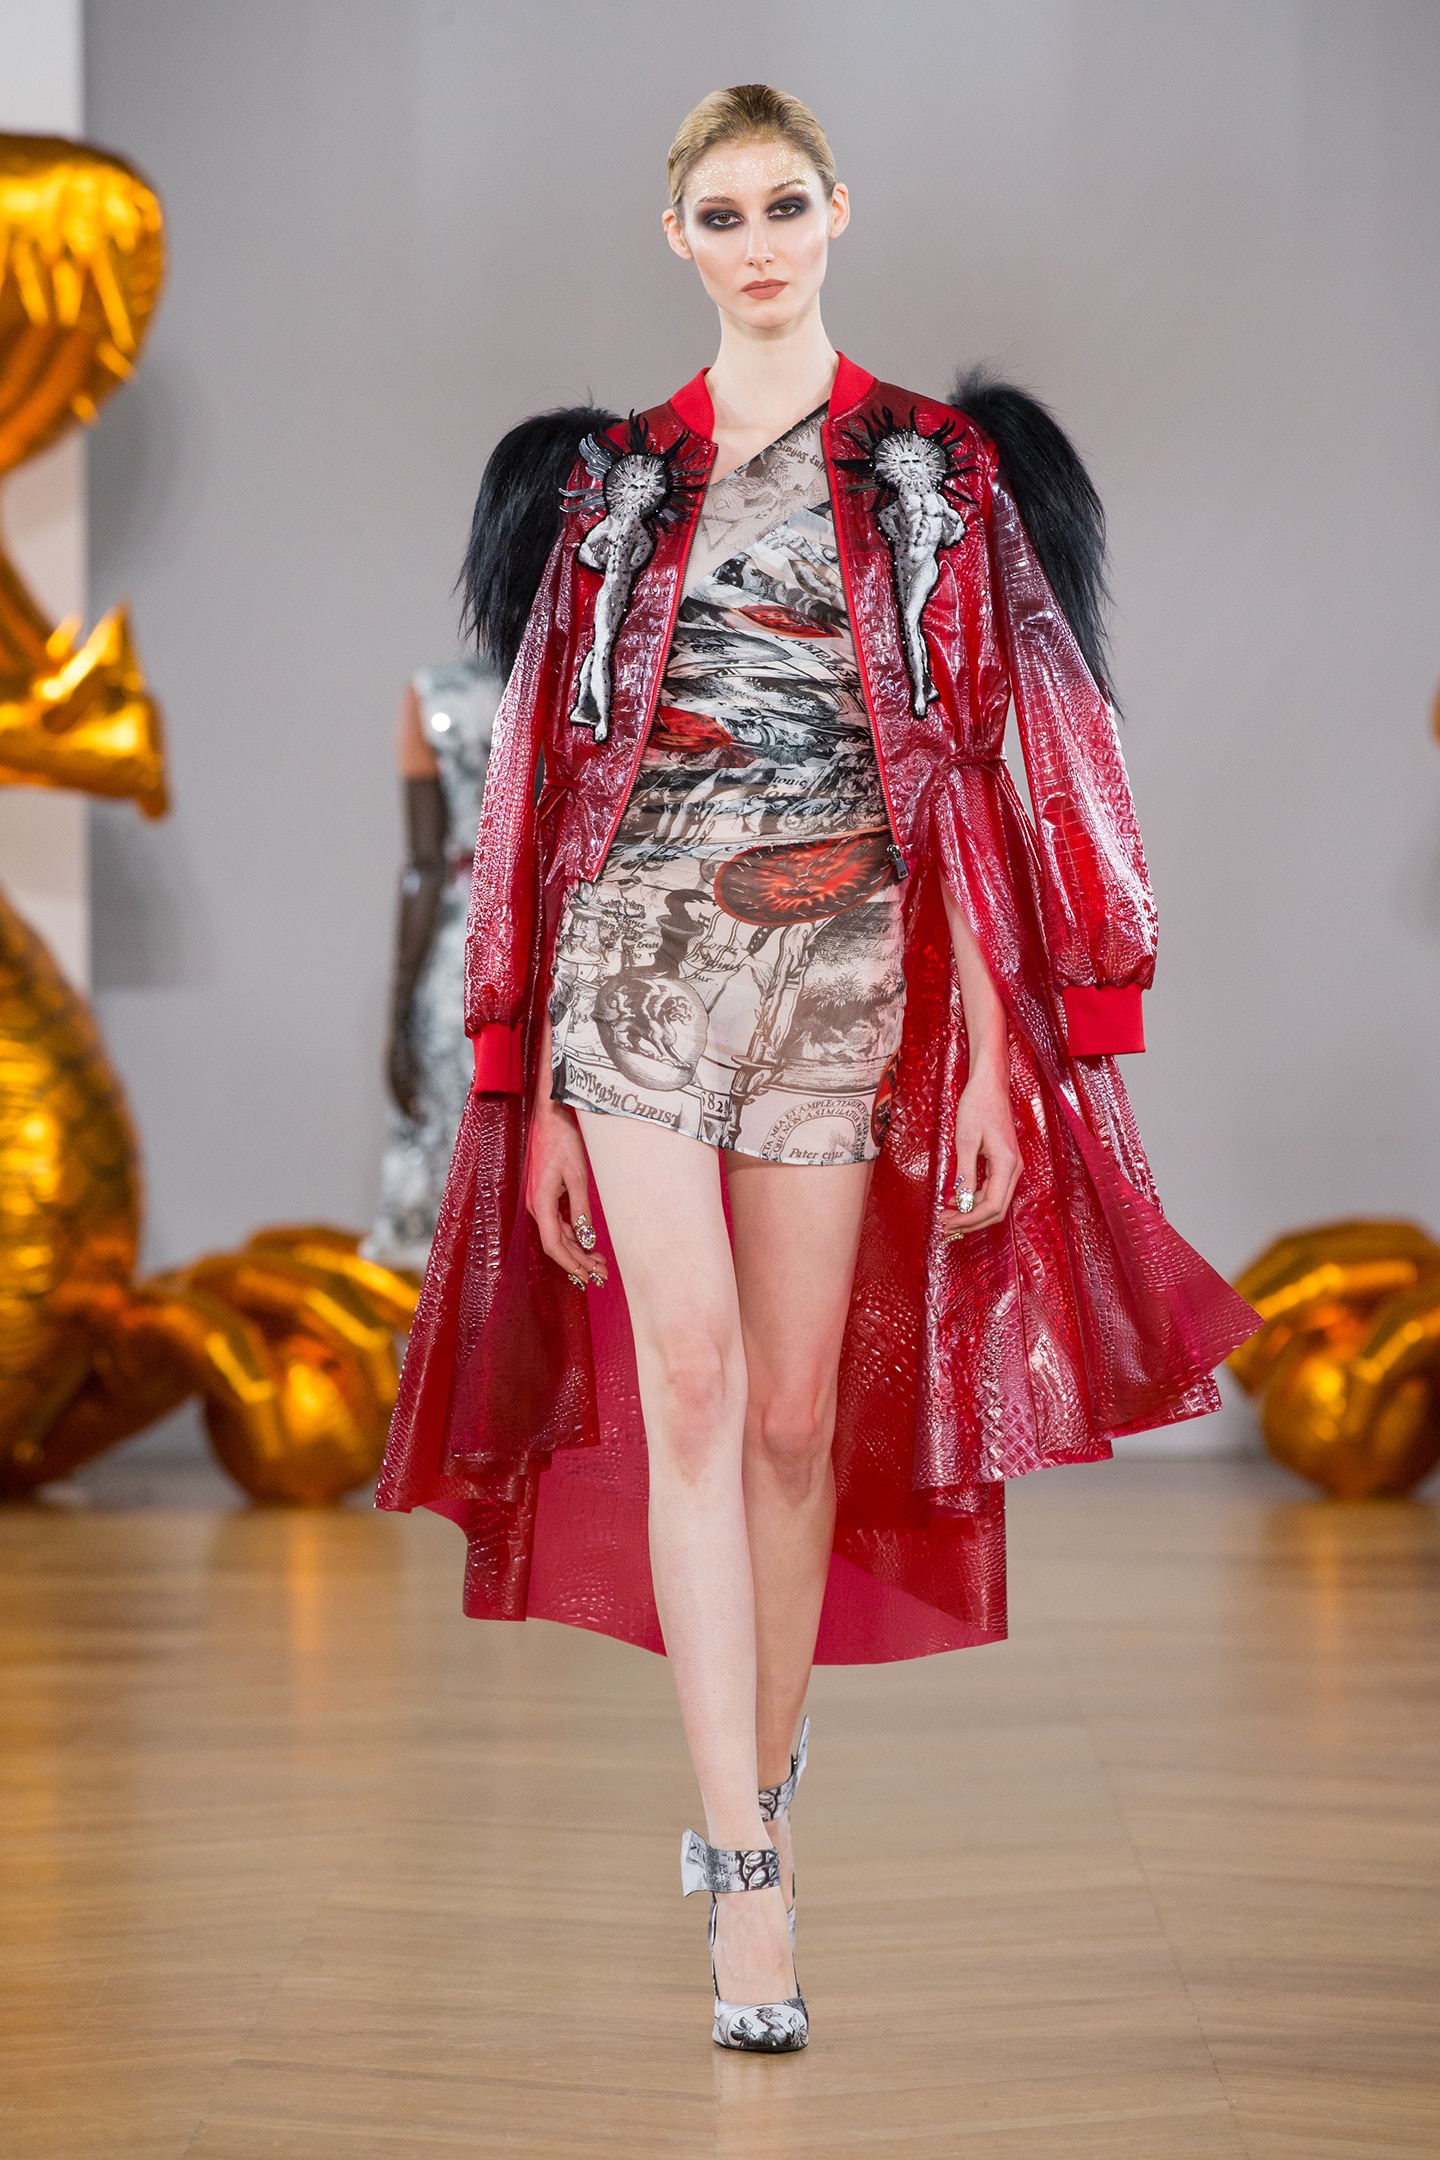 chiffon dress and bombers in red vinil by on aura tout vu couture